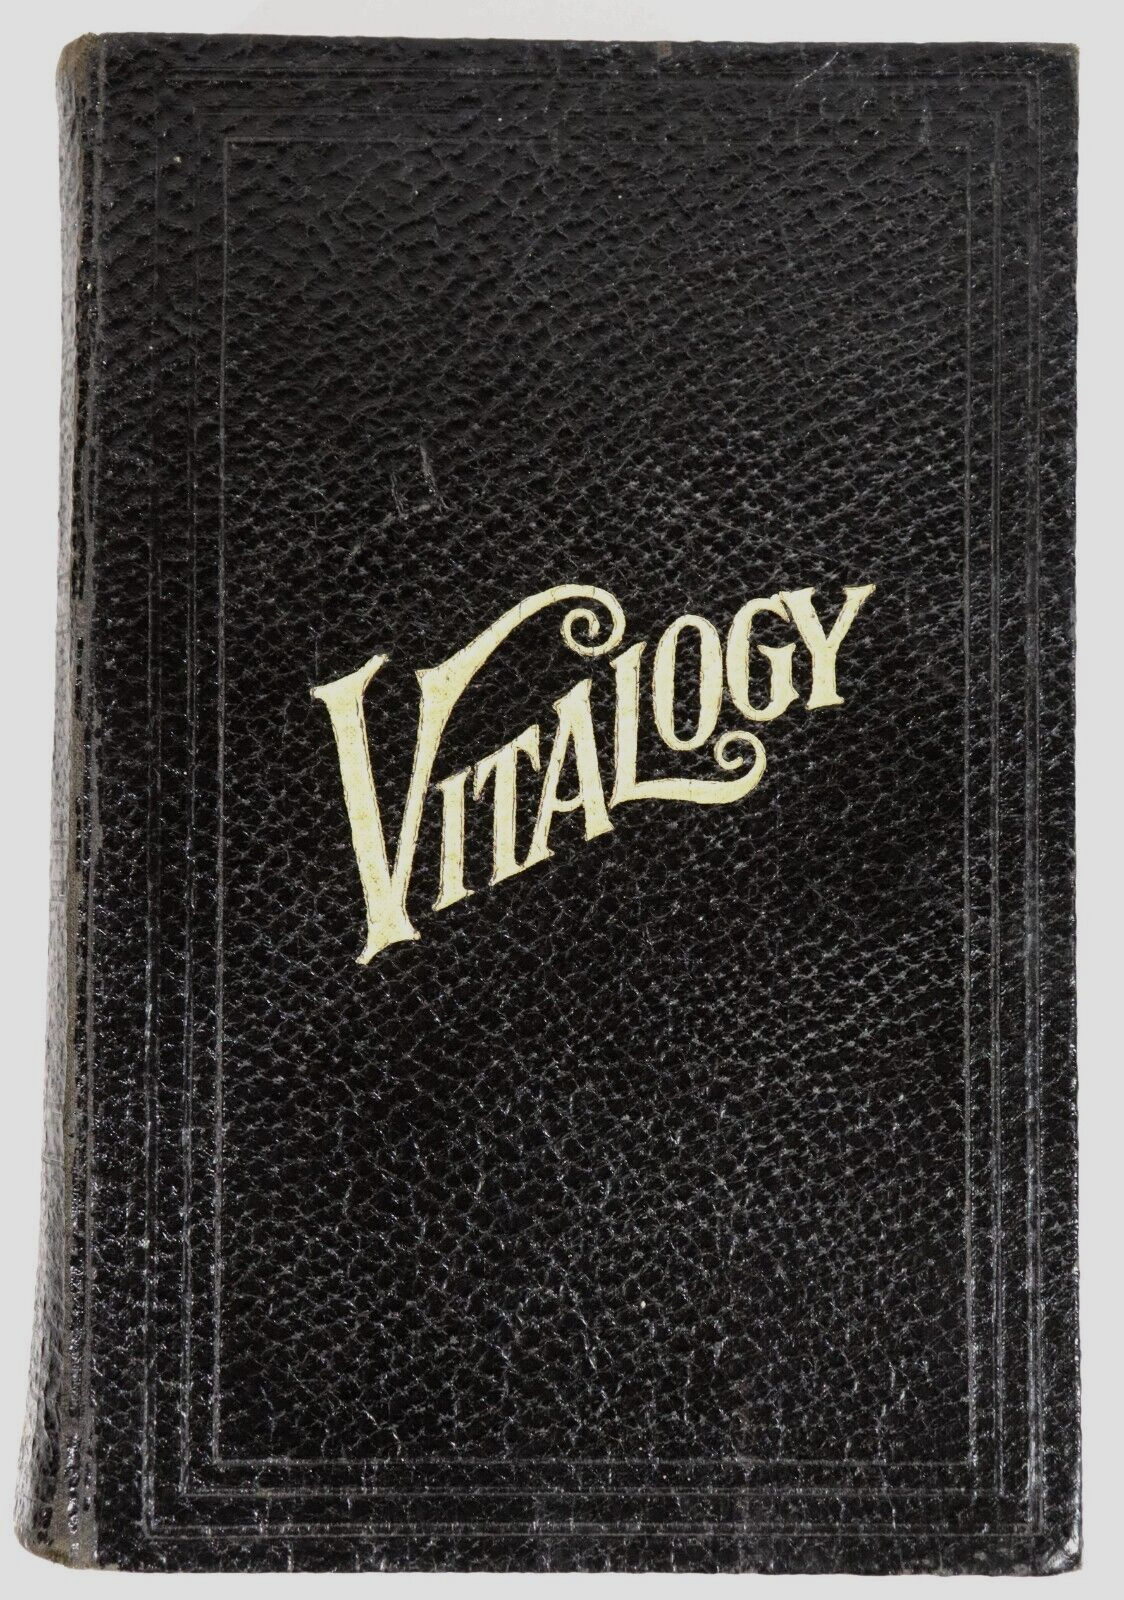 Vitalogy: Encyclopedia Of Health & Home - 1935 - Antique Medical Reference Book